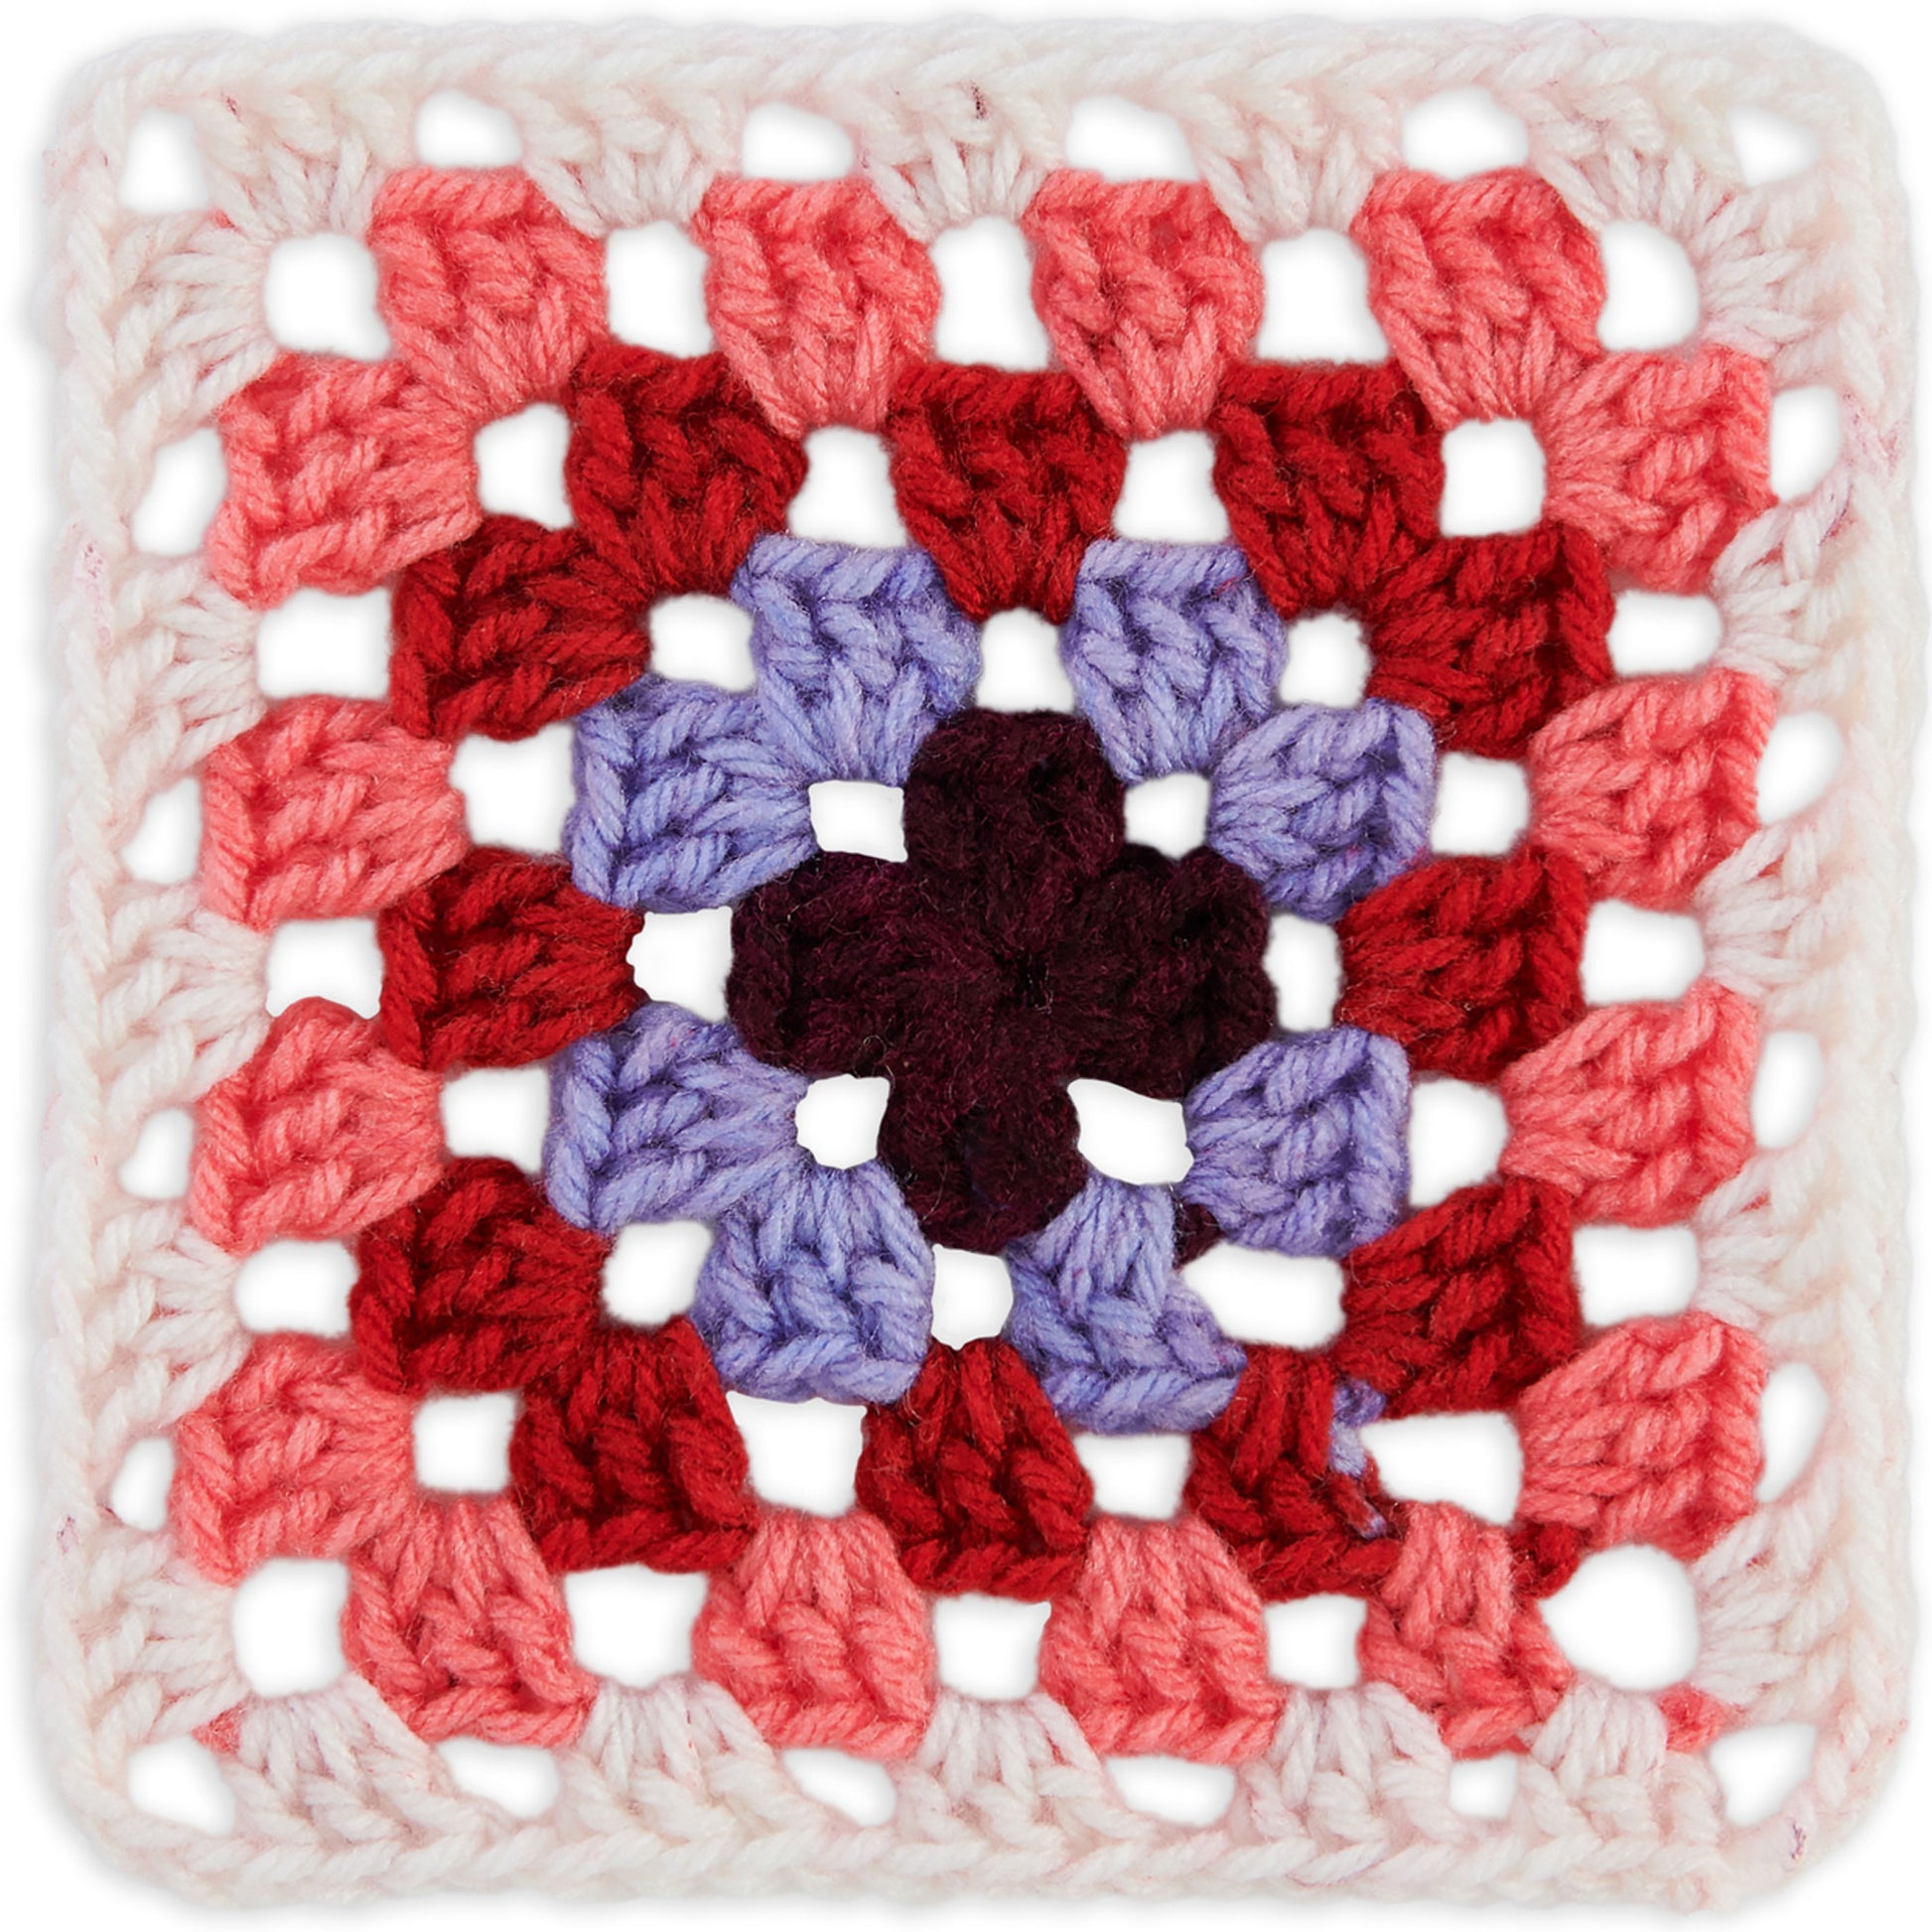 Red Heart All in One Granny Square Yarn